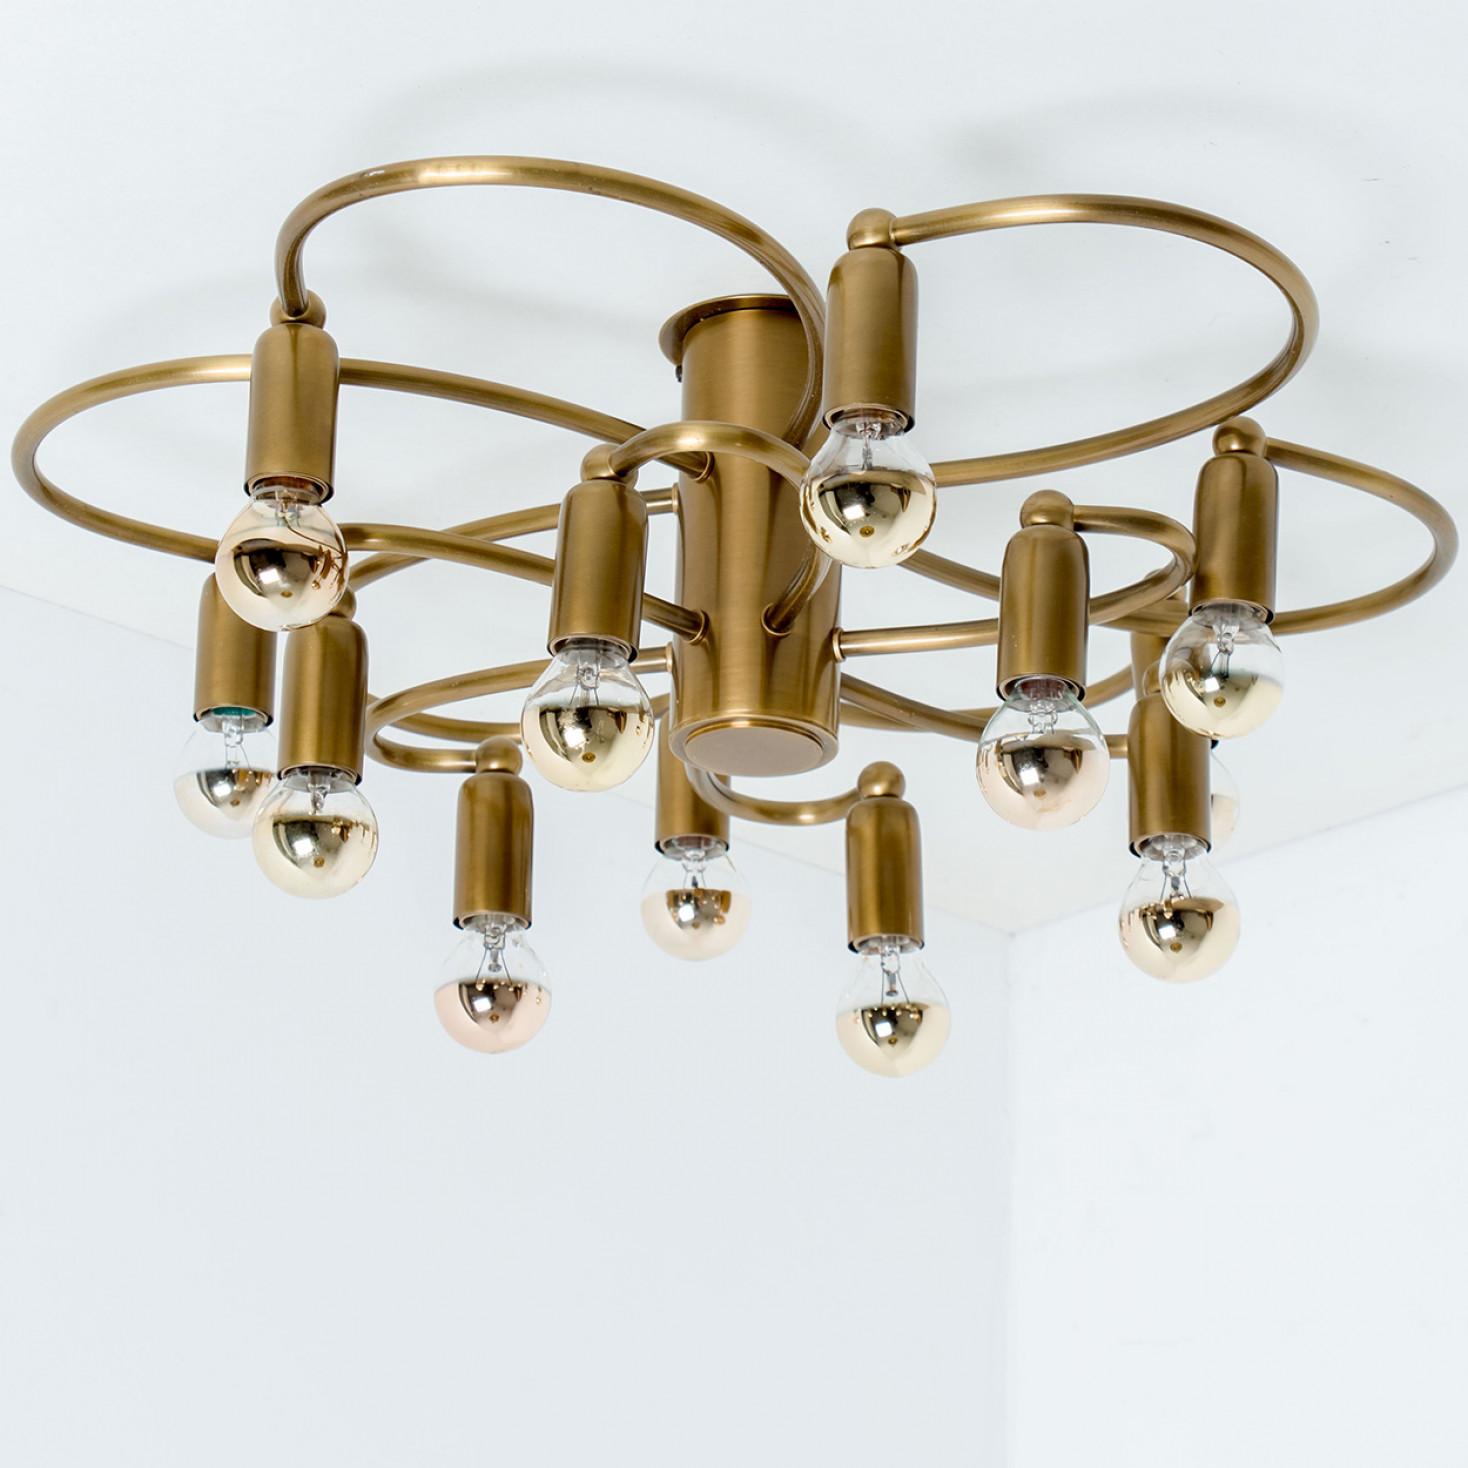 A gorgeous Sciolari-style ceiling light by Leola. Made of chromed brass in the beautiful shape of a flower, Germany, 1970s.

Dimensions:
Height: 7.08